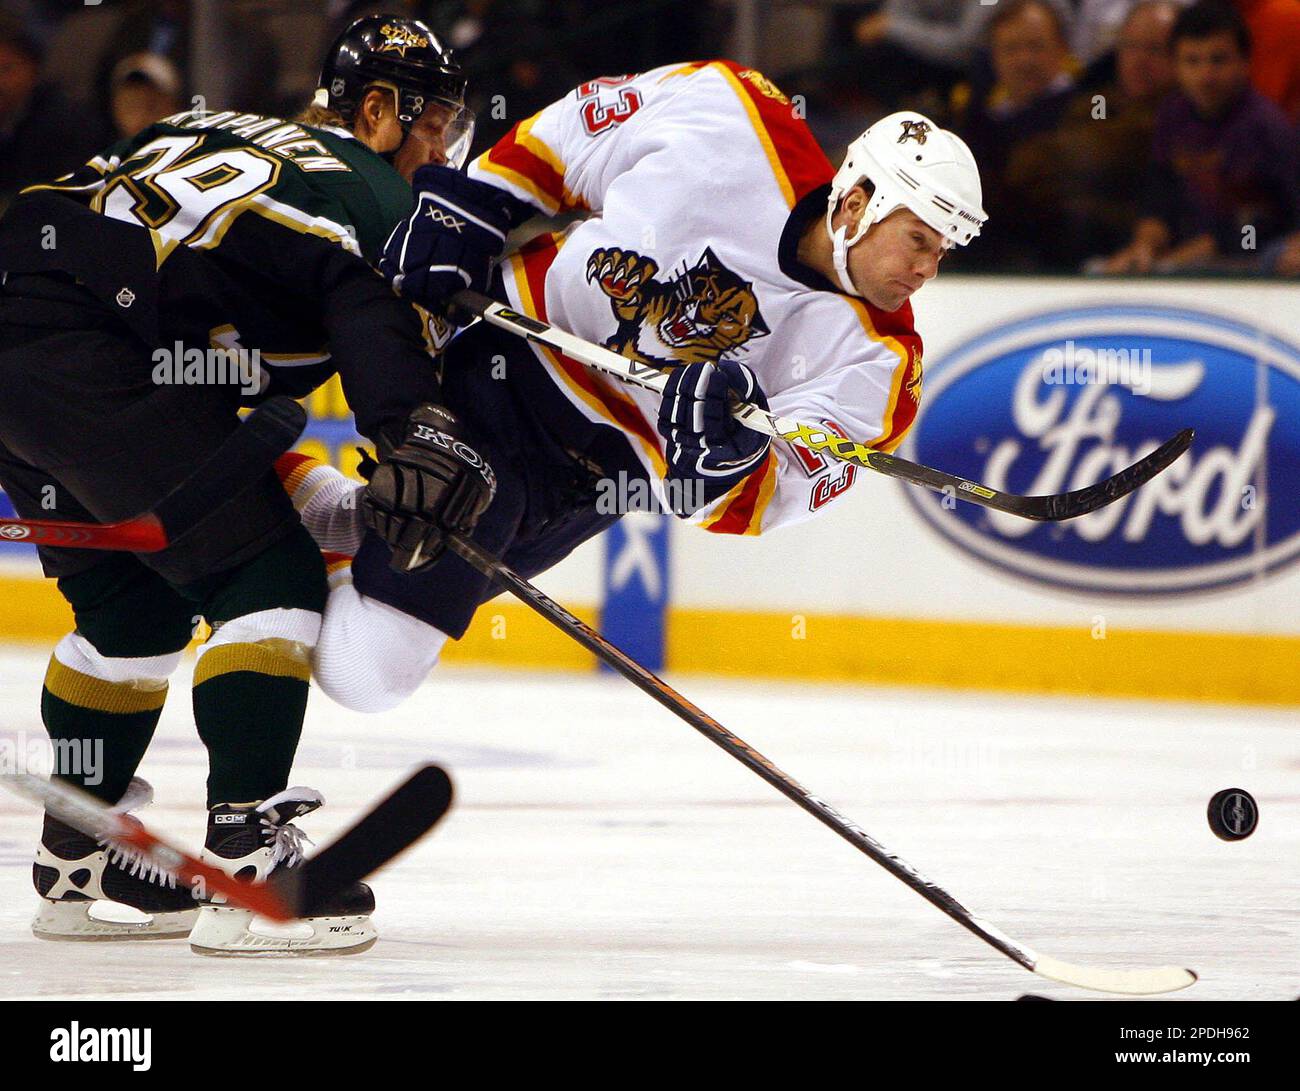 Florida Panthers' Martin Gelinas (23) is tripped by Dallas Stars' Niko  Kapanen (39) of Finland, during the second period in Dallas, Wednesday,  Dec. 7, 2005. The Stars won, 4-3. (AP Photo/Matt Slocum Stock Photo - Alamy